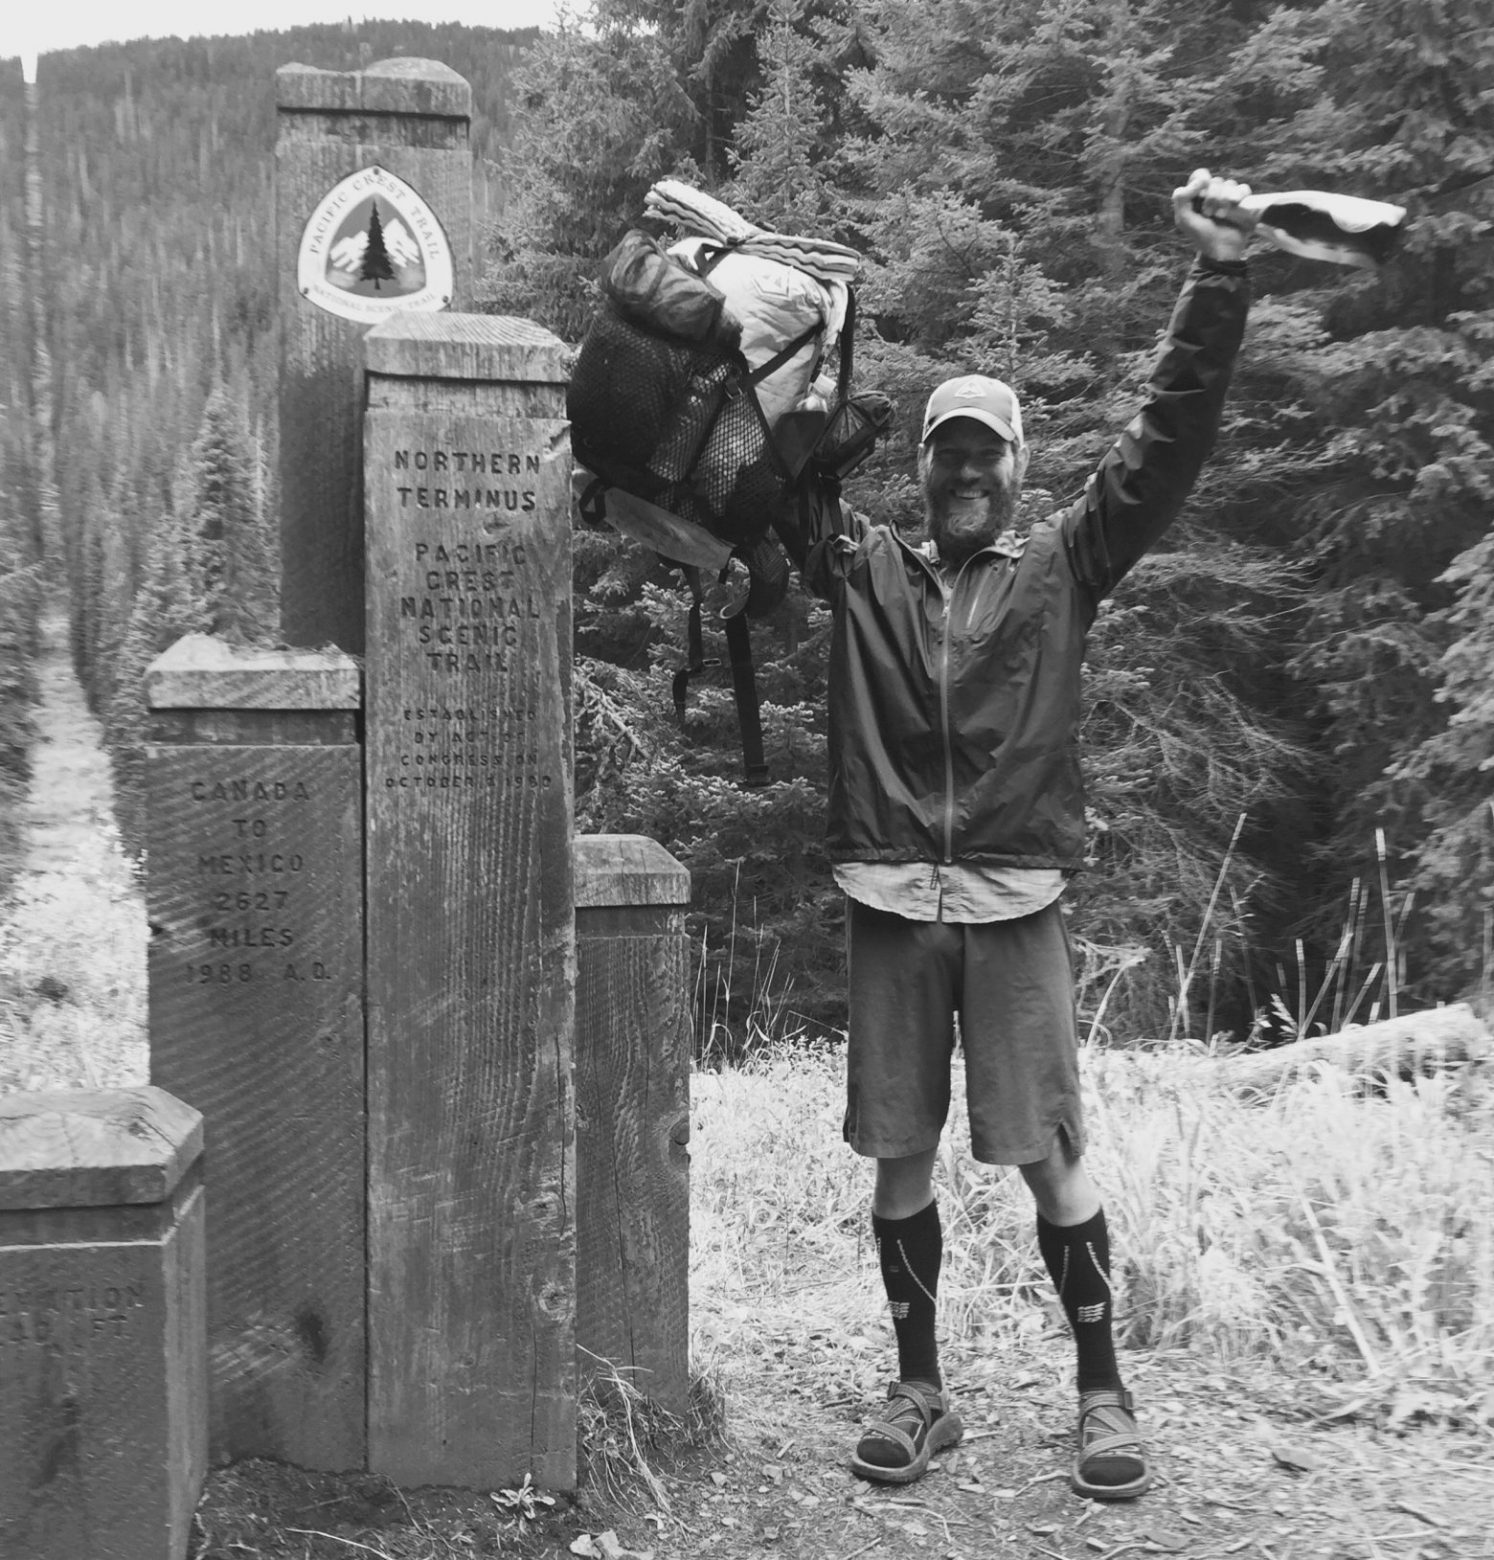 Mountain Man holding backpack and a bottle of champagne at the PCT northern terminus